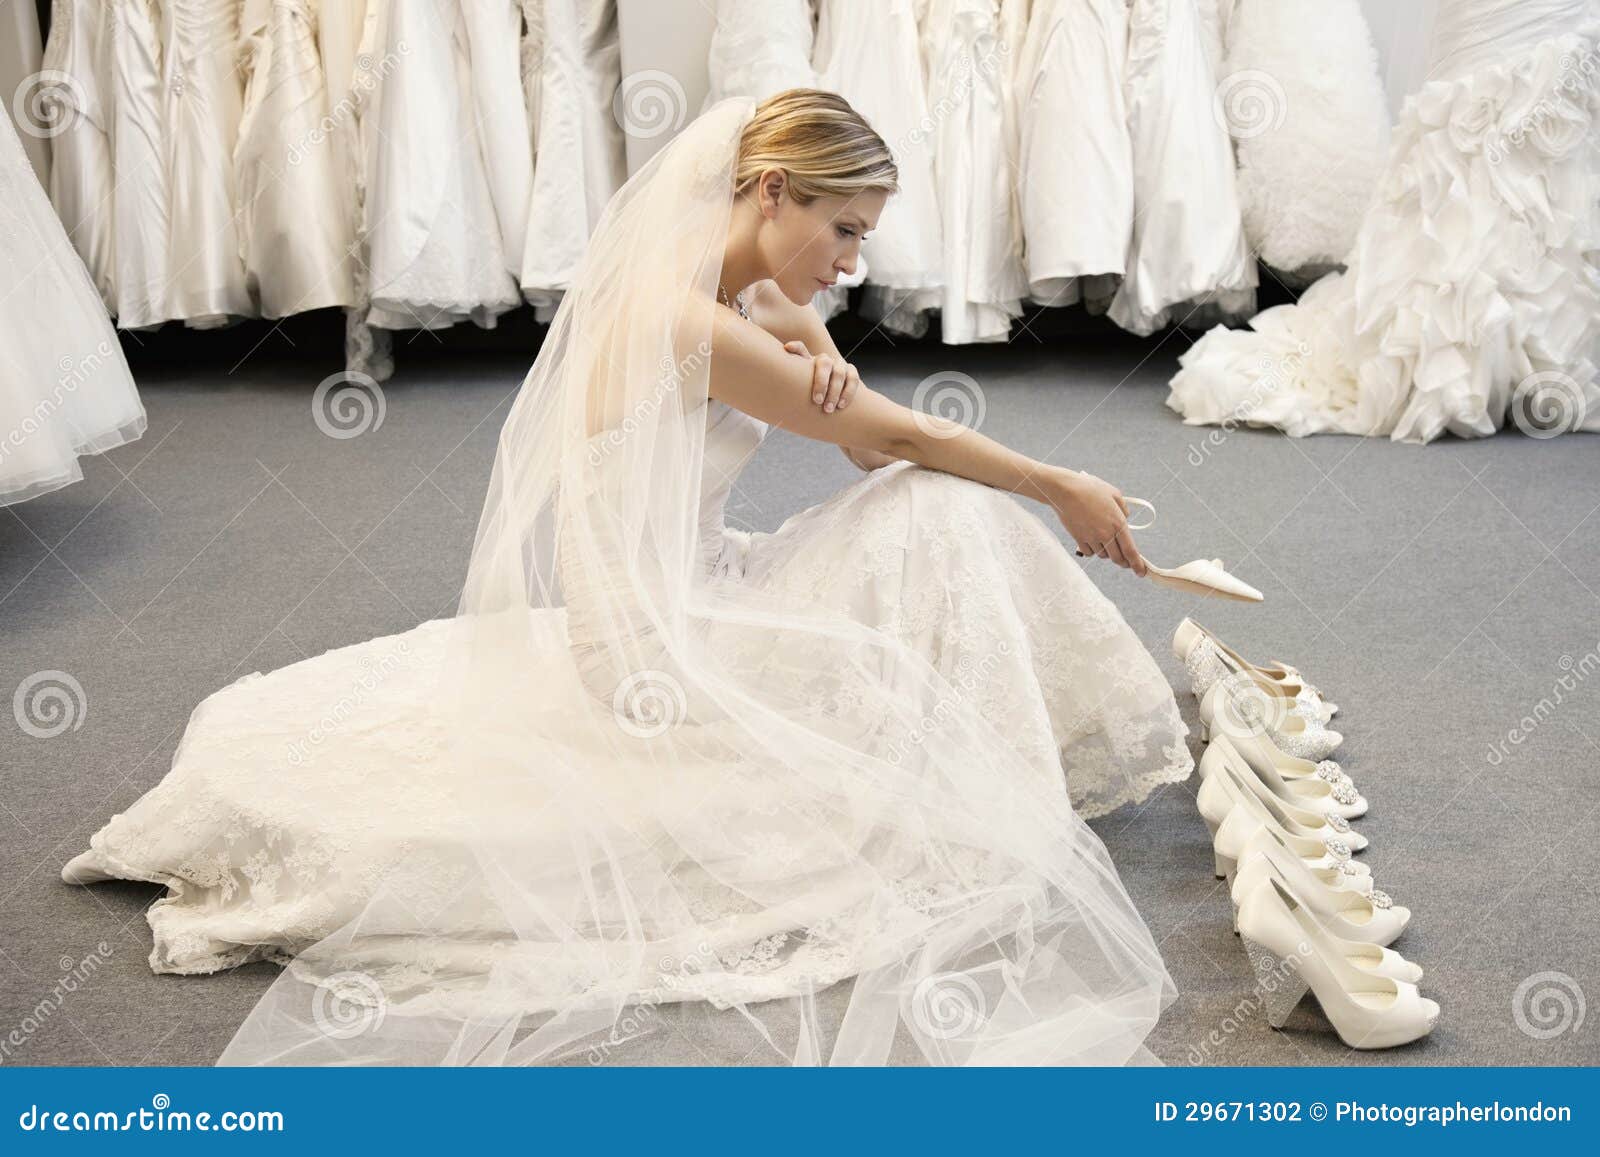 side view of young woman in wedding dress confused while selecting footwear